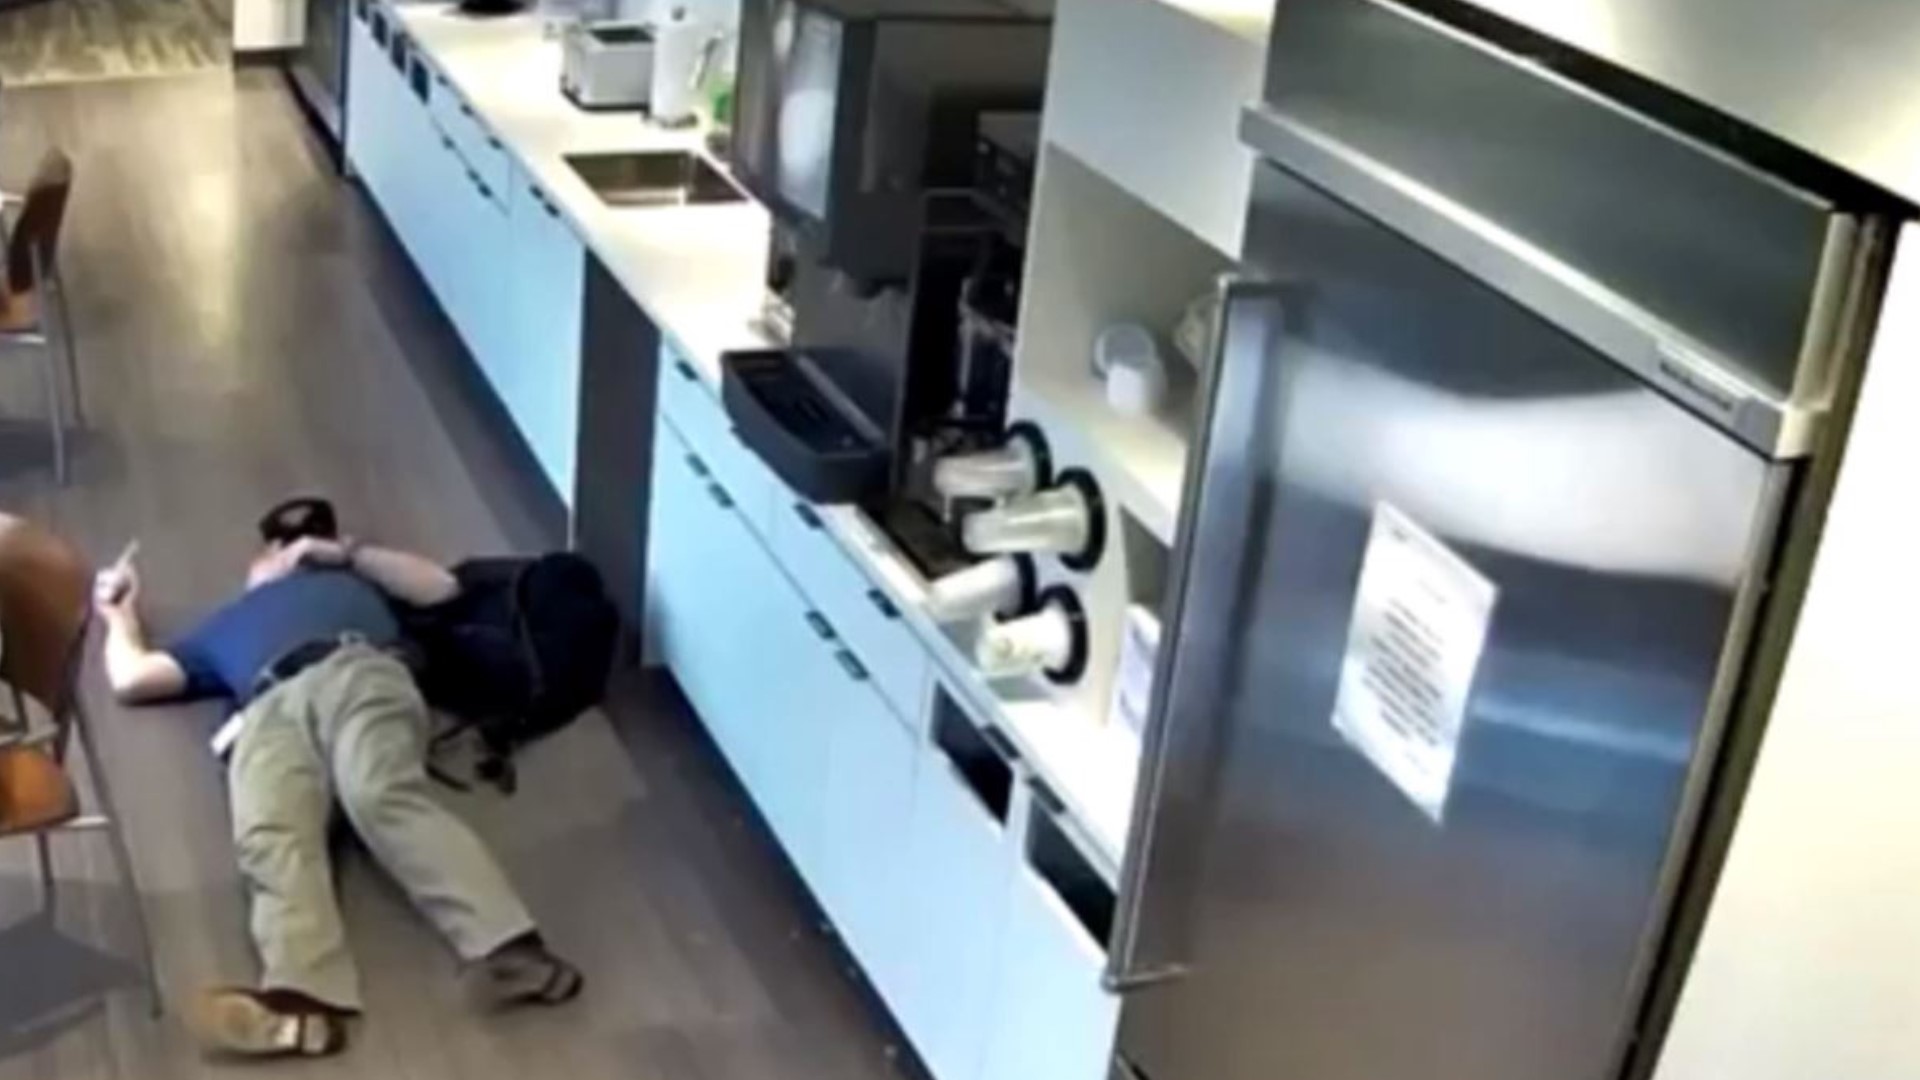 New Jersey prosecutors say this man filed an insurance claim after he slipped on ice cubes at his place of work but the video says something else about the 'fall'.